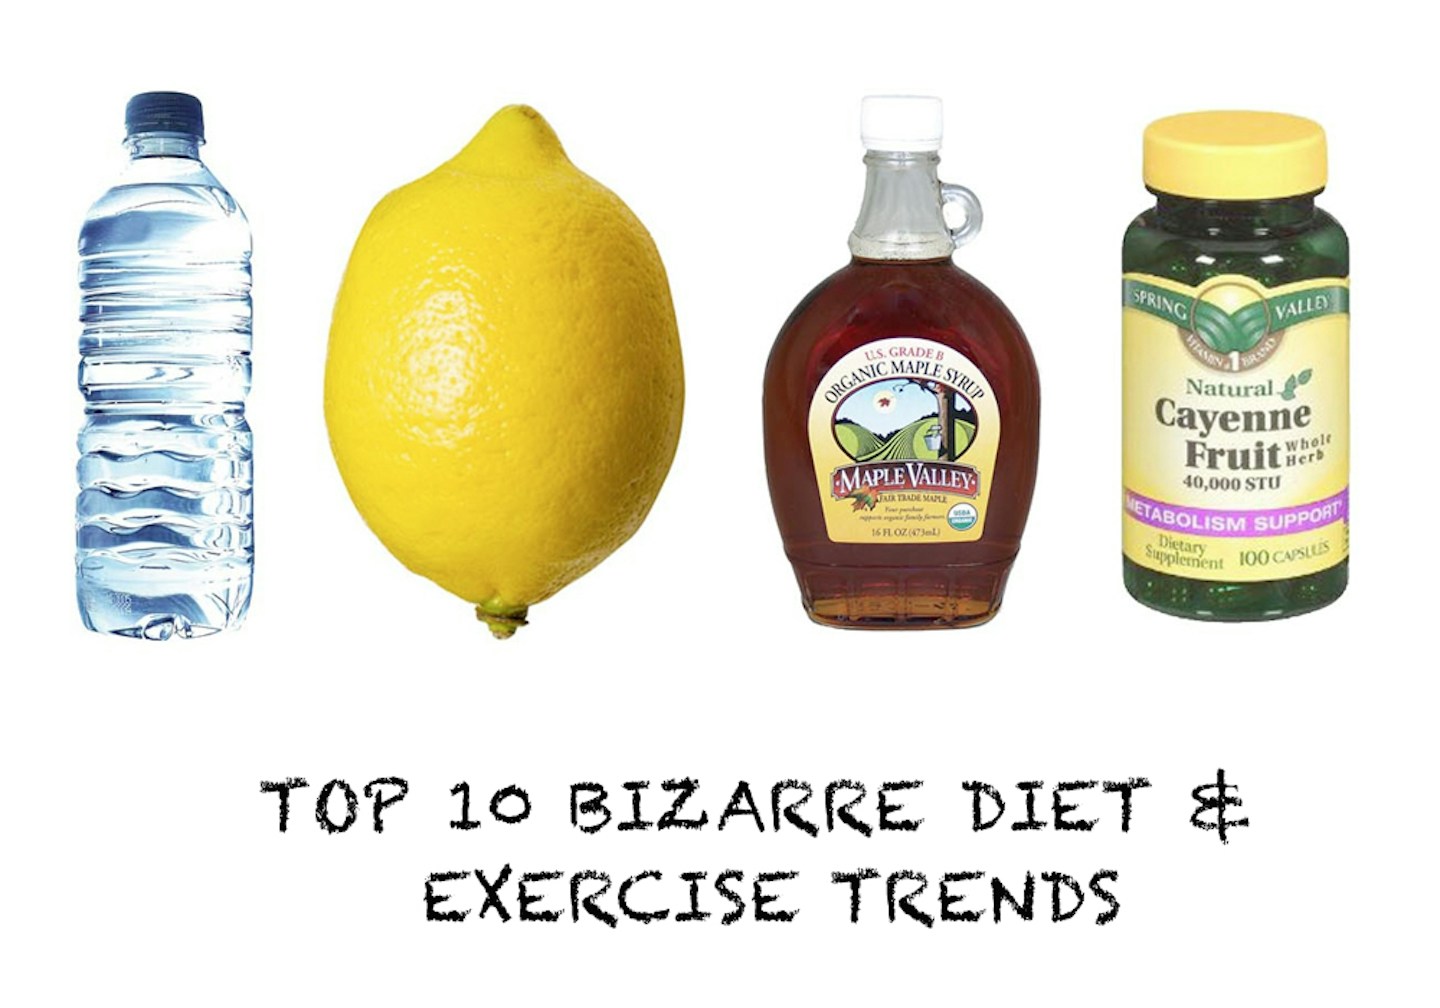 Top 10 bizarre diet and exercise trends